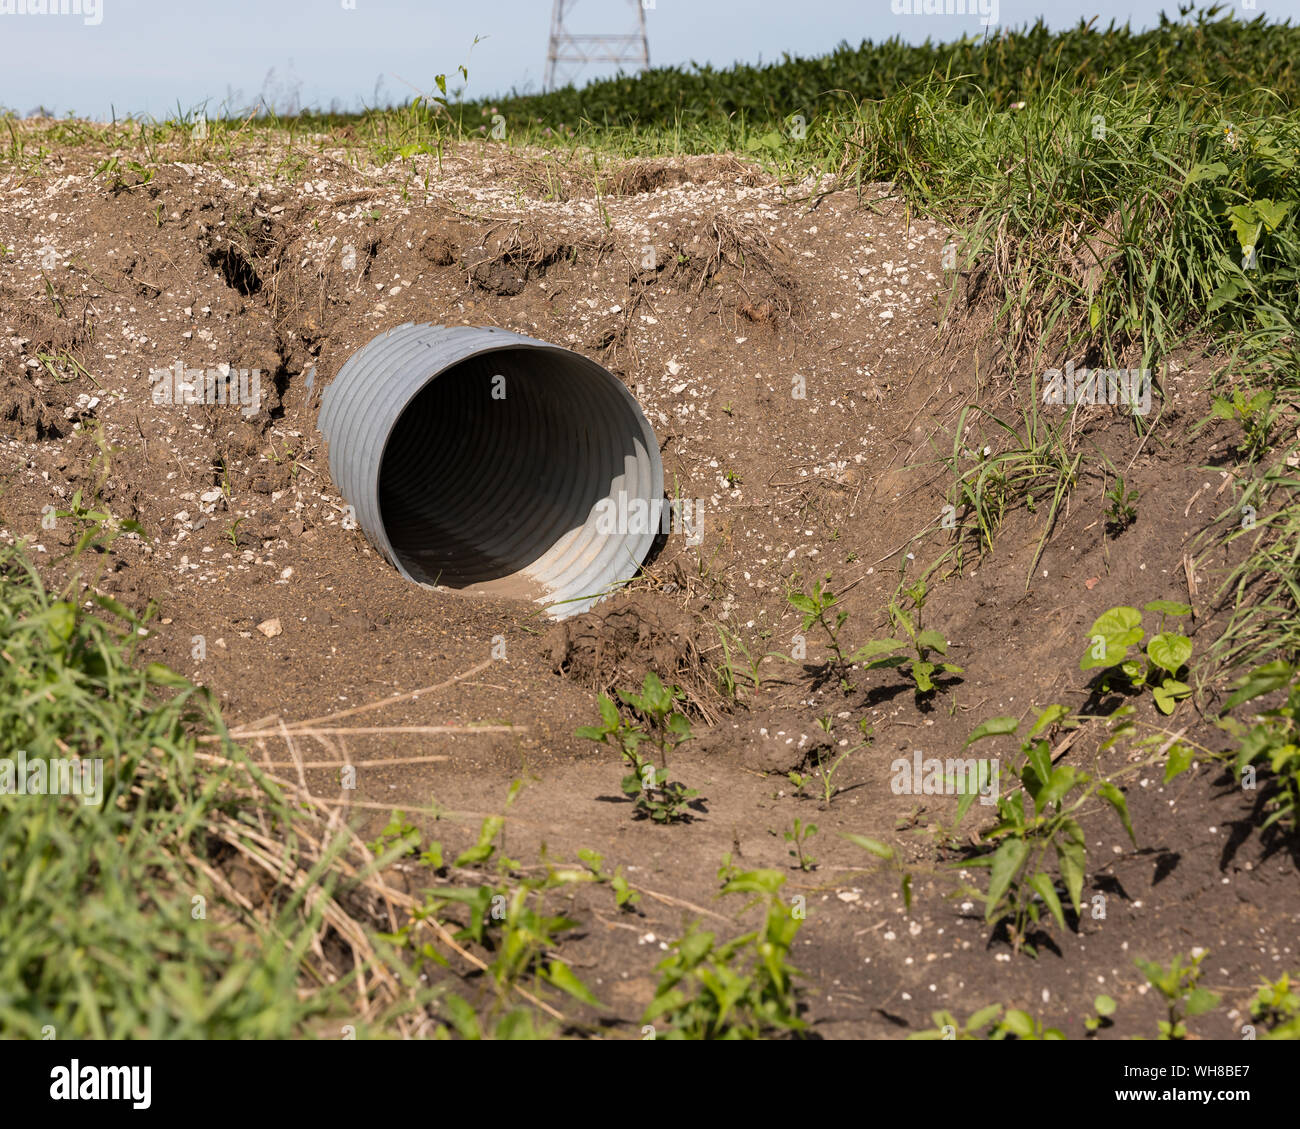 New corrugated metal drainage culvert pipe installed in ditch along road for farm field access Stock Photo